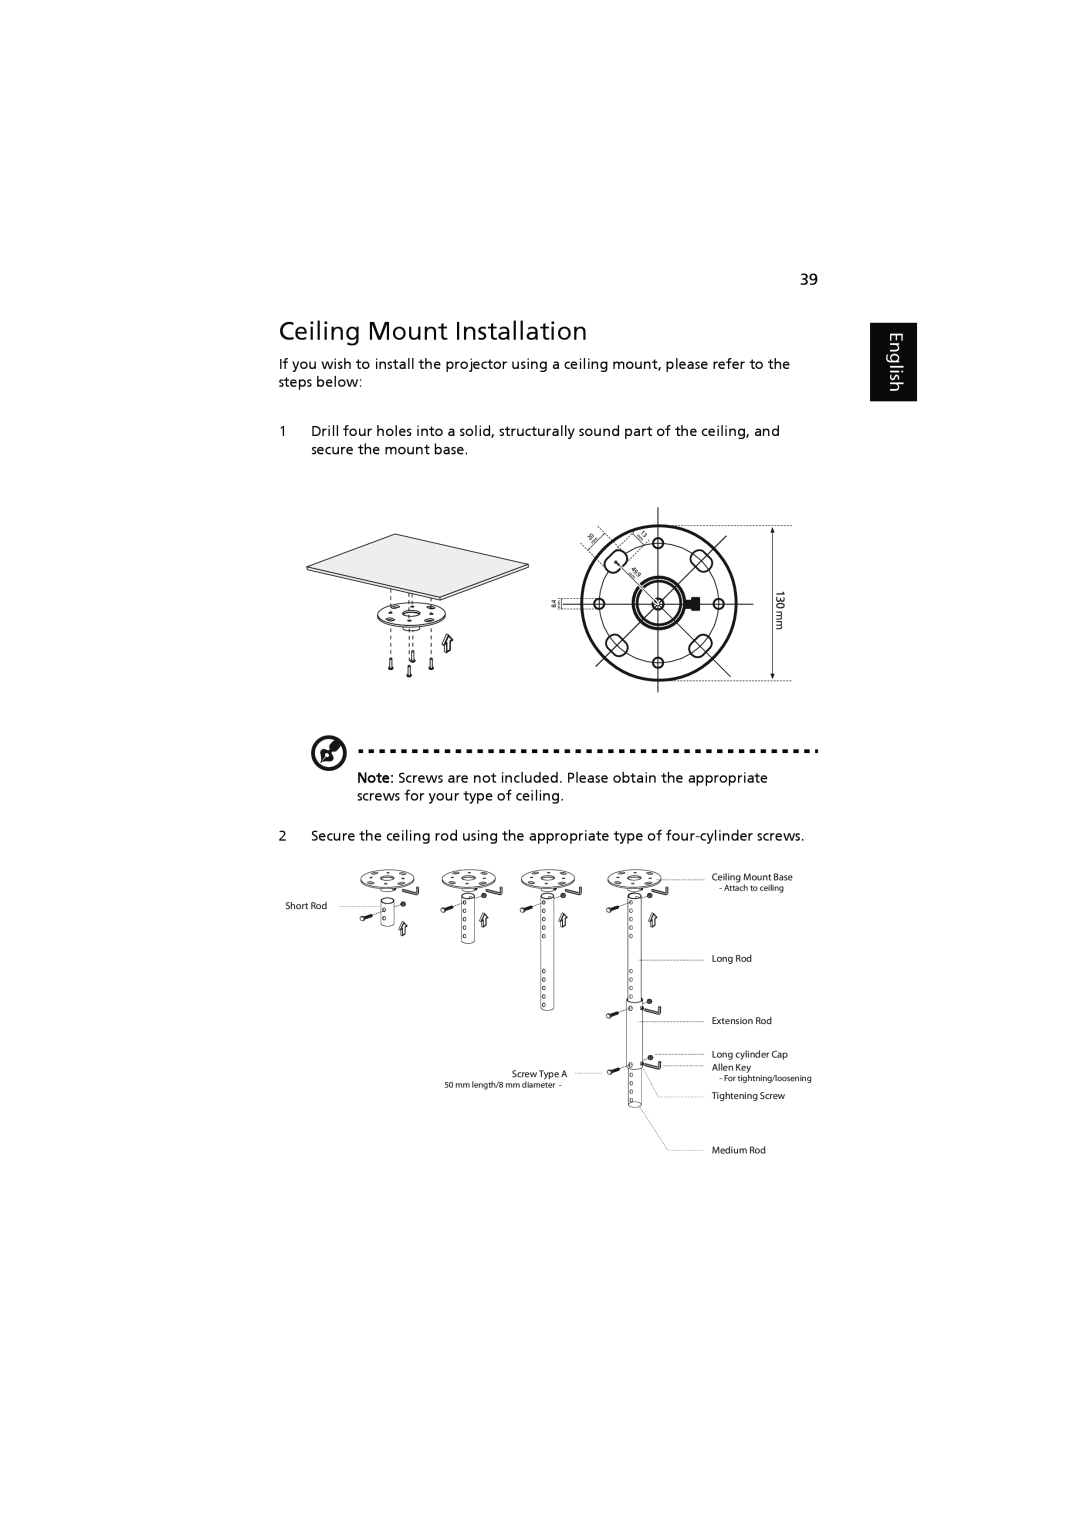 Acer P1206, P1303W, P1203, P1200, P1100 manual Ceiling Mount Installation, English 